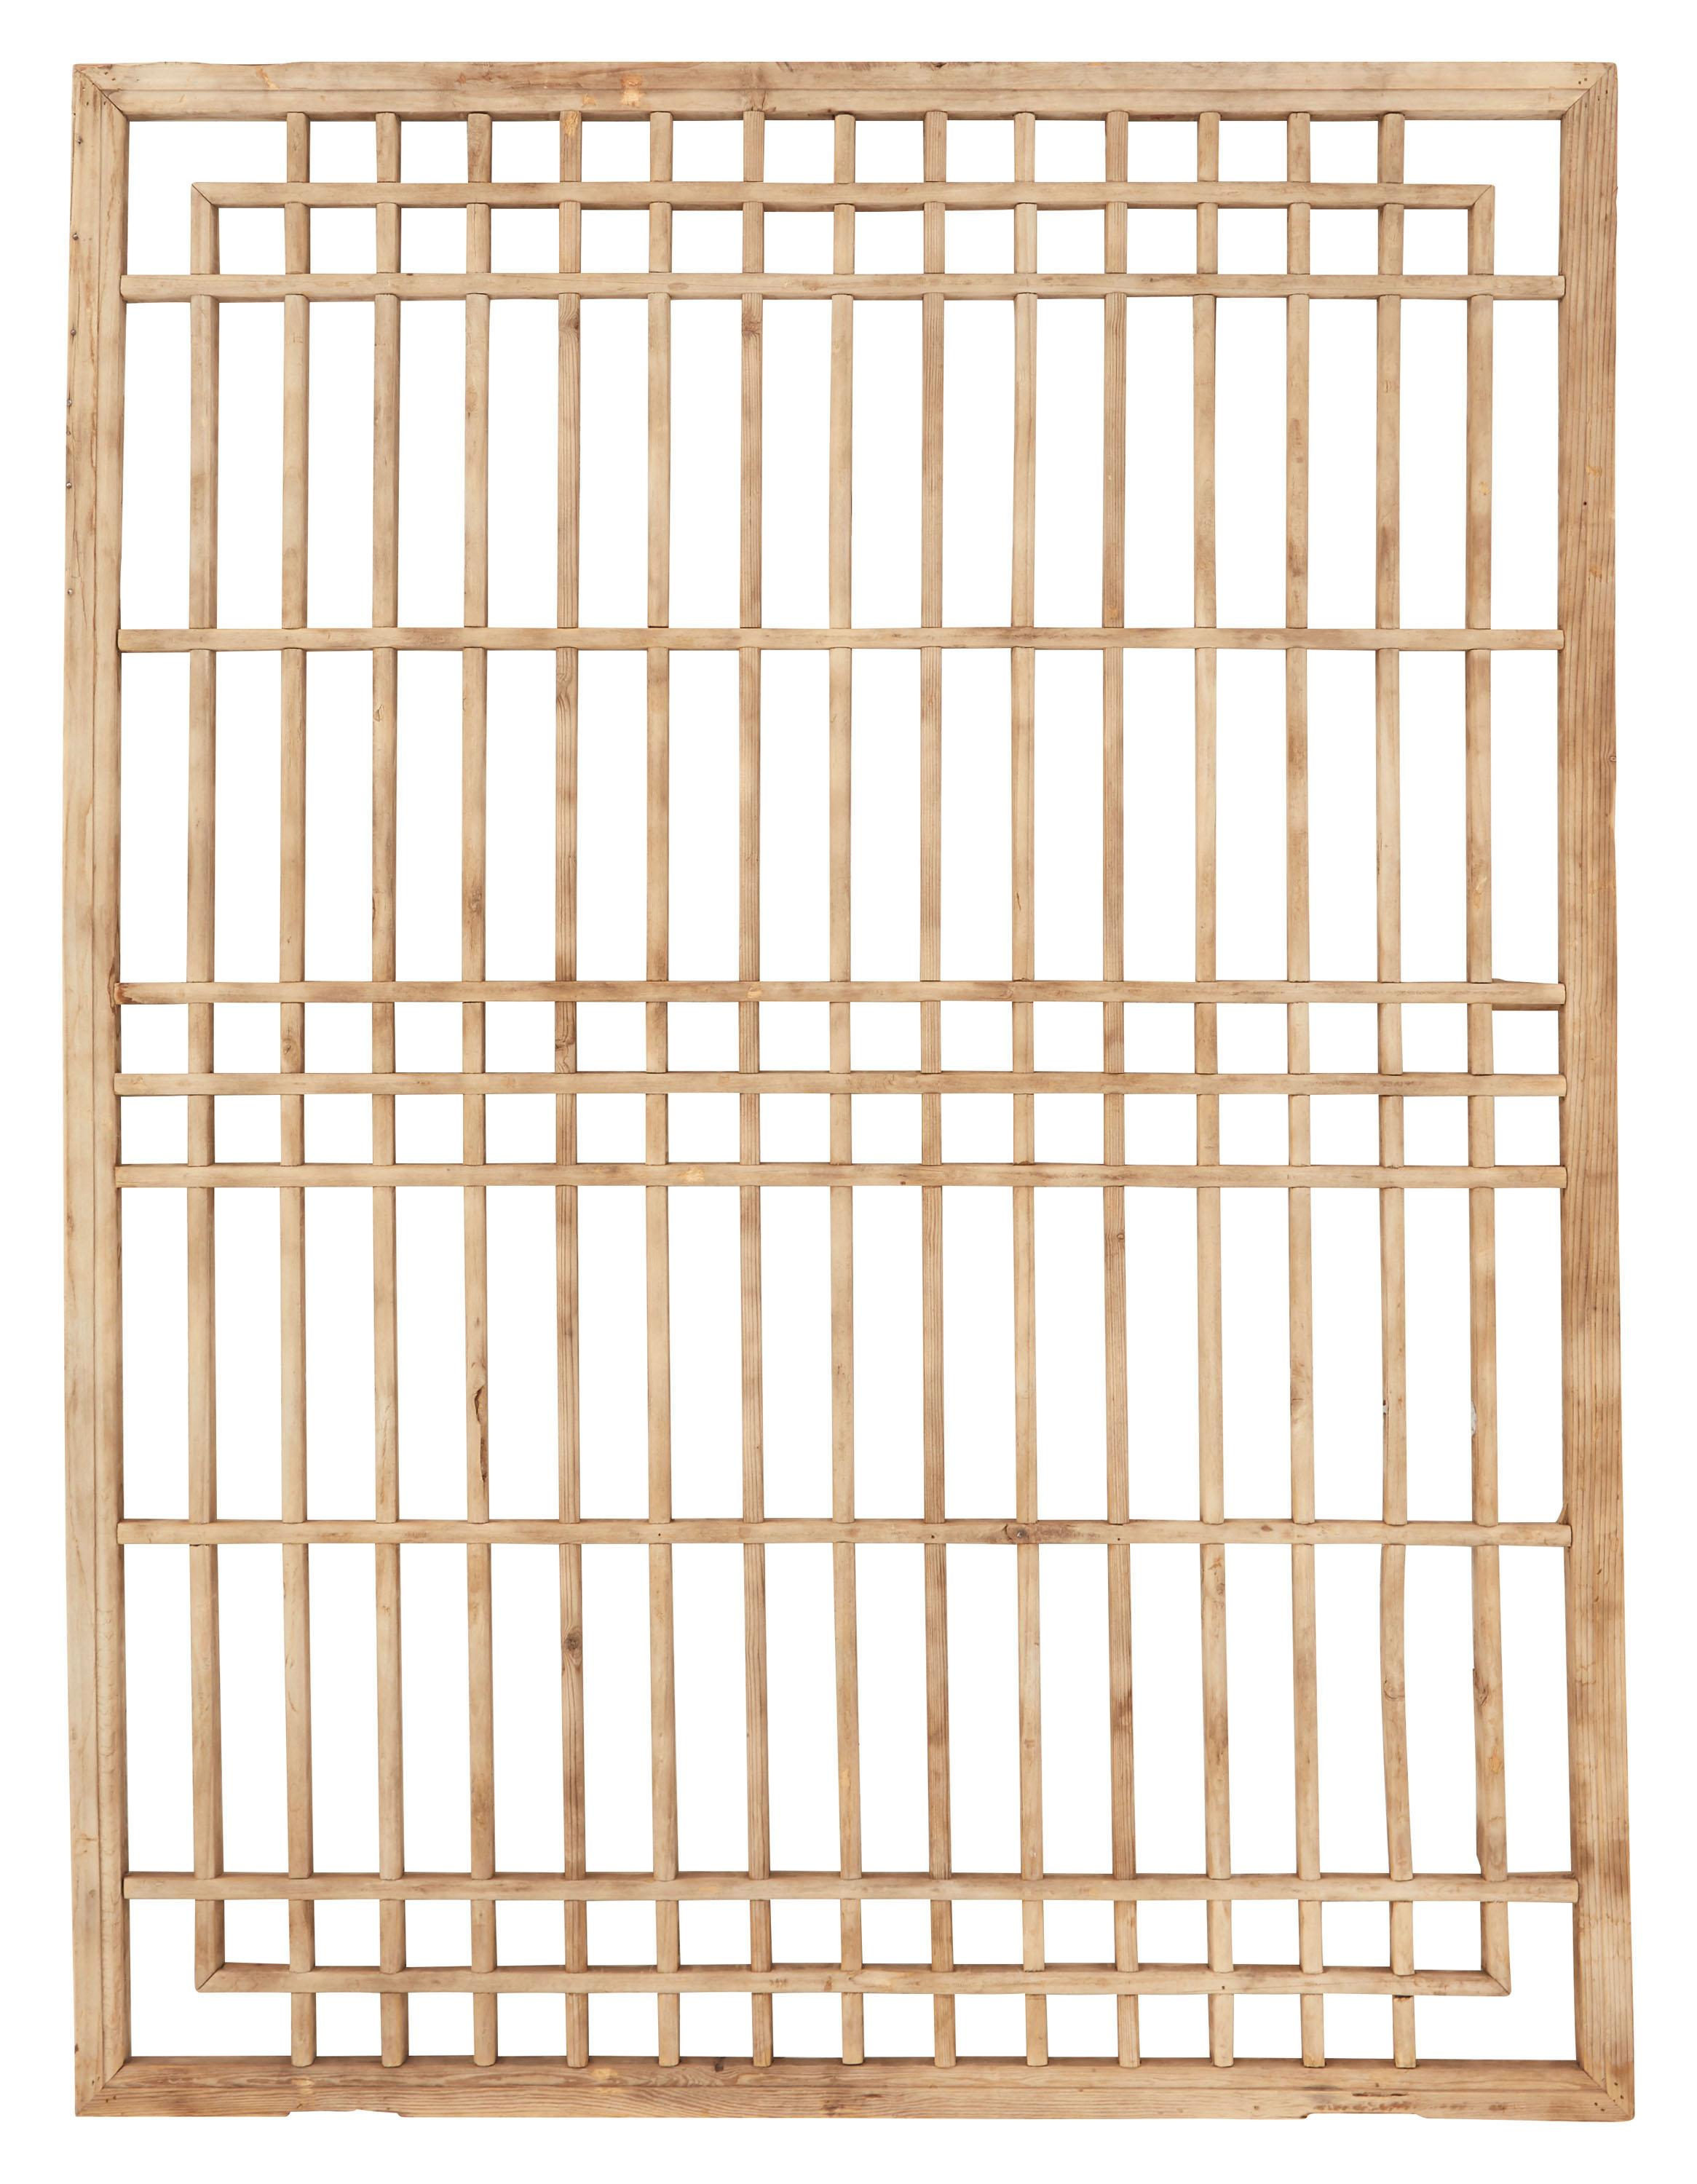 Our vintage elm screen was made in China sometime in the late 19th century. Commonly used as a window covering in homes across the country, this intricate lattice-work shutter was originally paired with a thin rice paper panel in the summer months